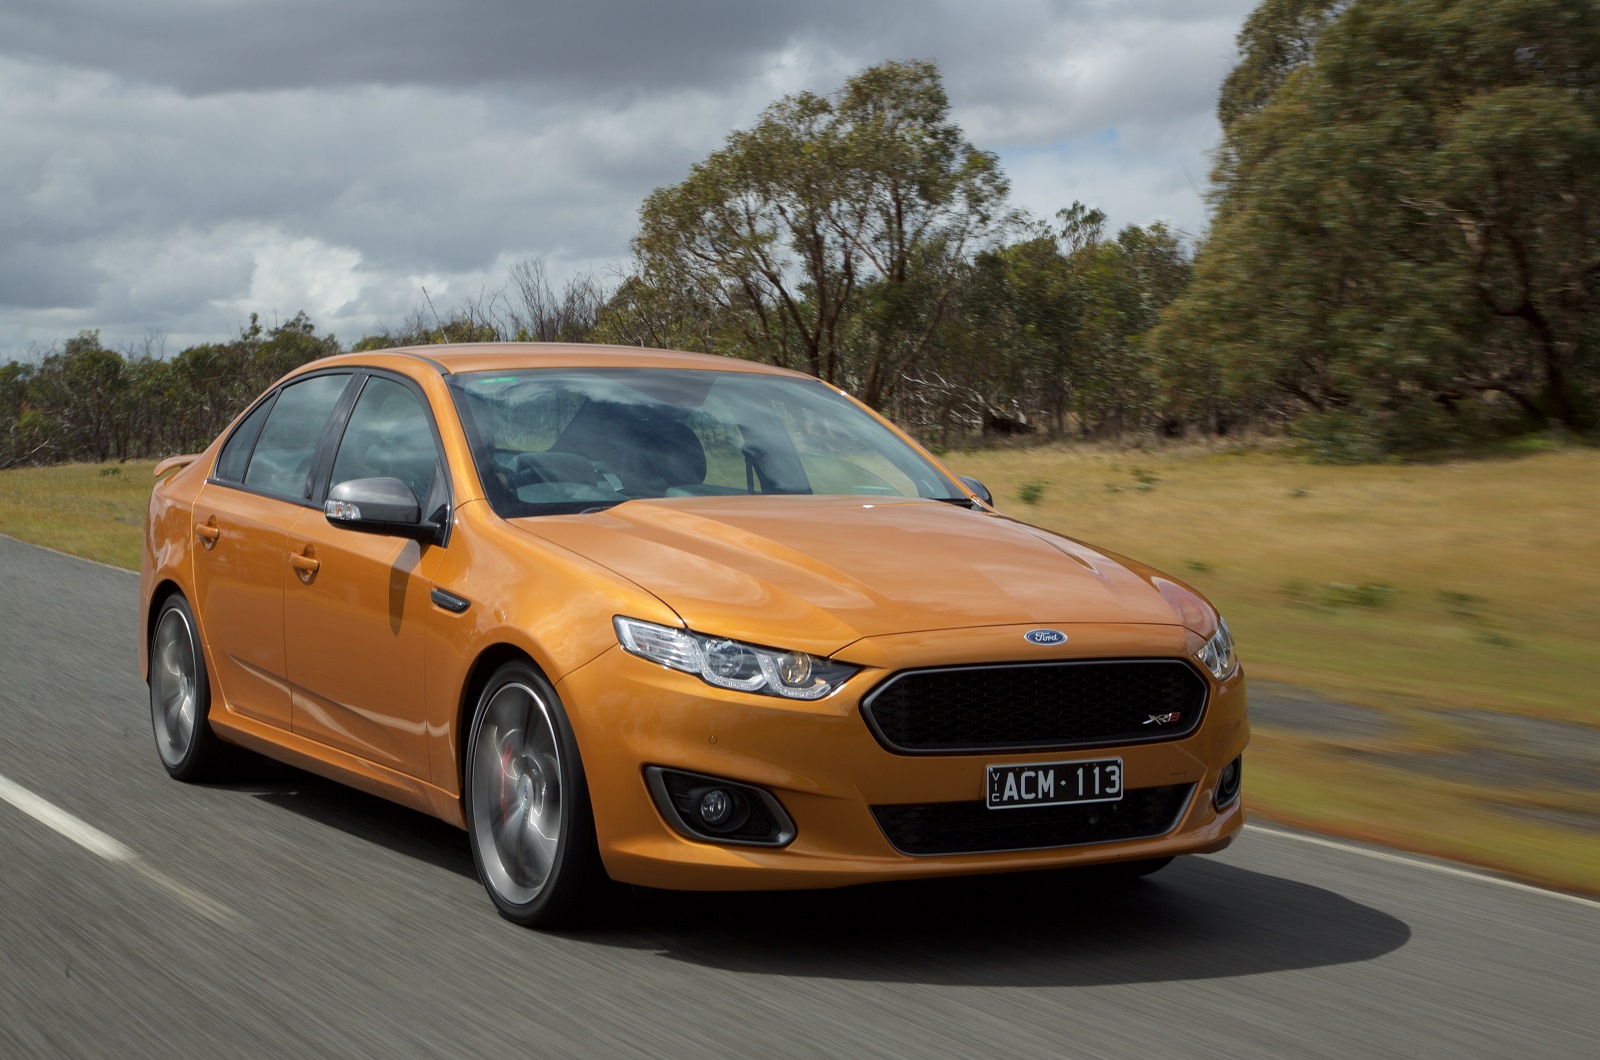 <p>Ford’s Australian division triggered a domino effect in <strong>2013</strong> when it announced plans to stop building cars locally. It made its last saloon, a blue Falcon XR6, in <strong>October 2016</strong> and closed the Broadmeadows assembly line shortly after. All told, it built about <strong>3.5 million units</strong> of the Falcon in 56 years.</p><p>Toyota and General Motors shuttered their Australian manufacturing operations shortly after. While the move cost thousands of jobs, Ford argued it was inevitable because demand for locally-built rear-wheel-drive saloons was free-falling. In 2003, it sold nearly <strong>75,000 units</strong> of the Falcon in Australia. In the early 2010s, annual sales dropped under the <strong>20,000-unit</strong> threshold with no signs of going back up.</p><p>Even without the Falcon, Ford remains near the top of the Australian sales chart. It sold <strong>39,540 units</strong> of the Ranger in 2020, a figure that makes the truck the second-best-selling vehicle in Australia.</p>